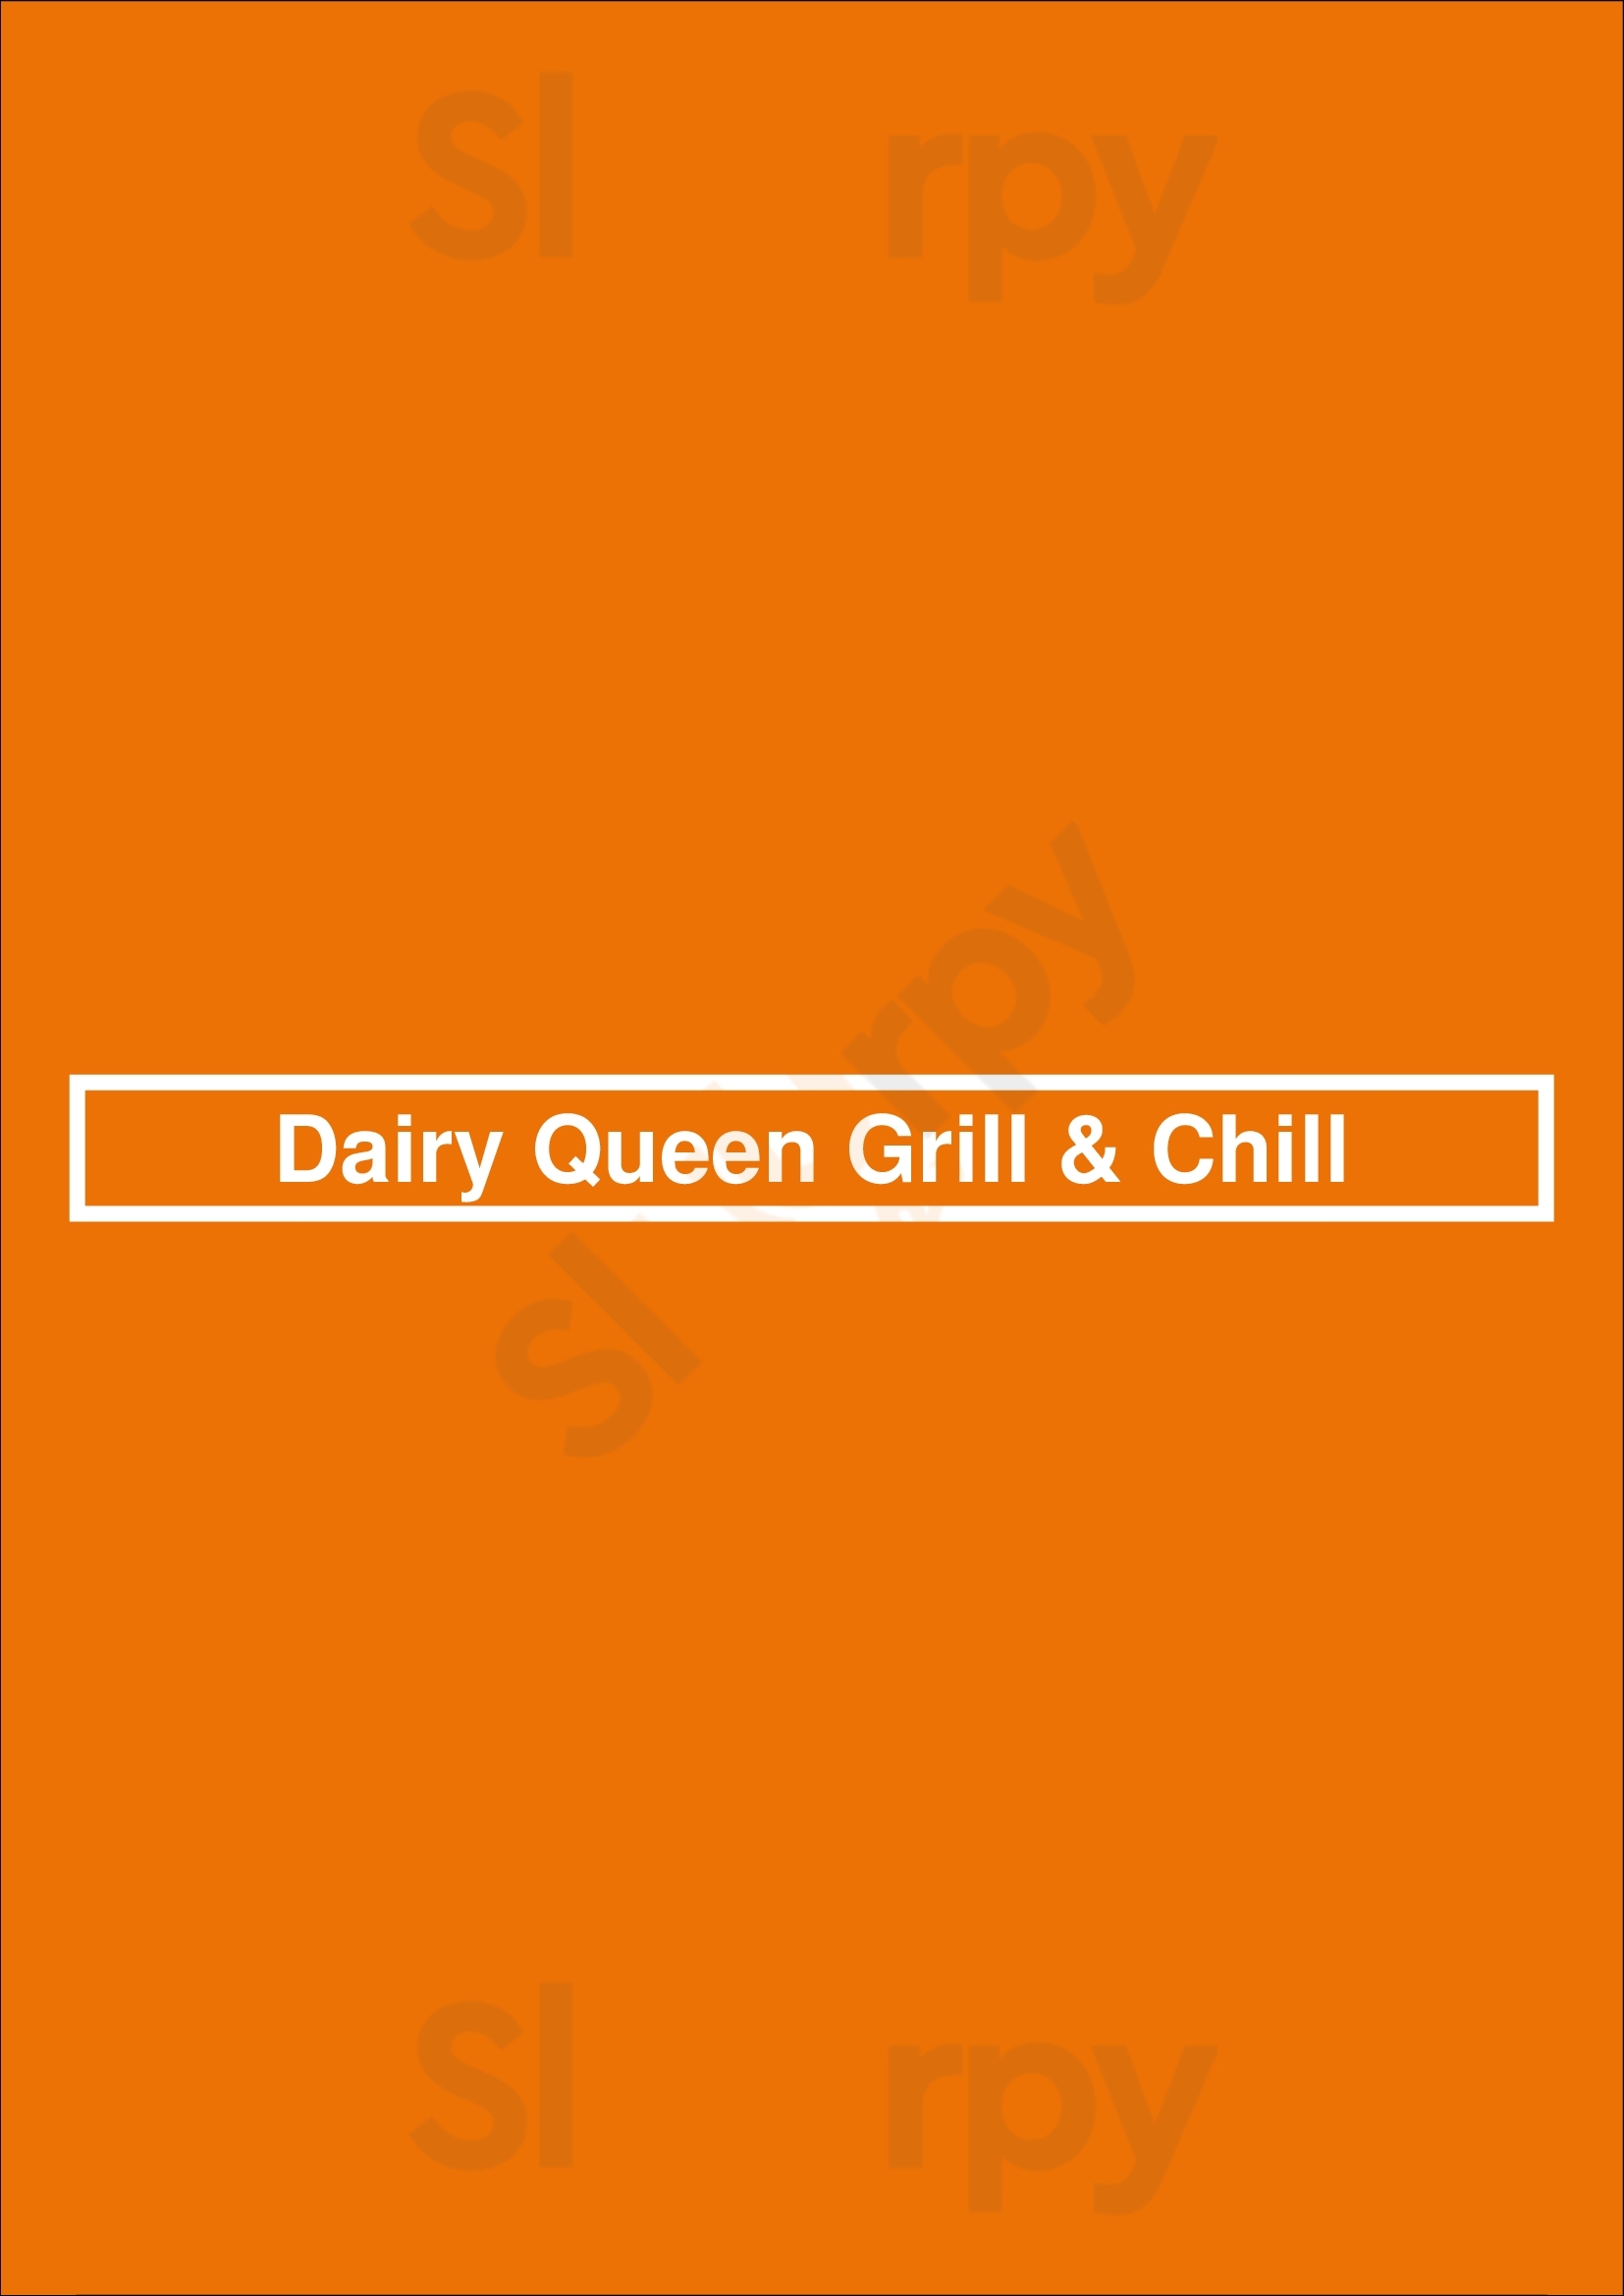 Dairy Queen Grill & Chill East Northport Menu - 1